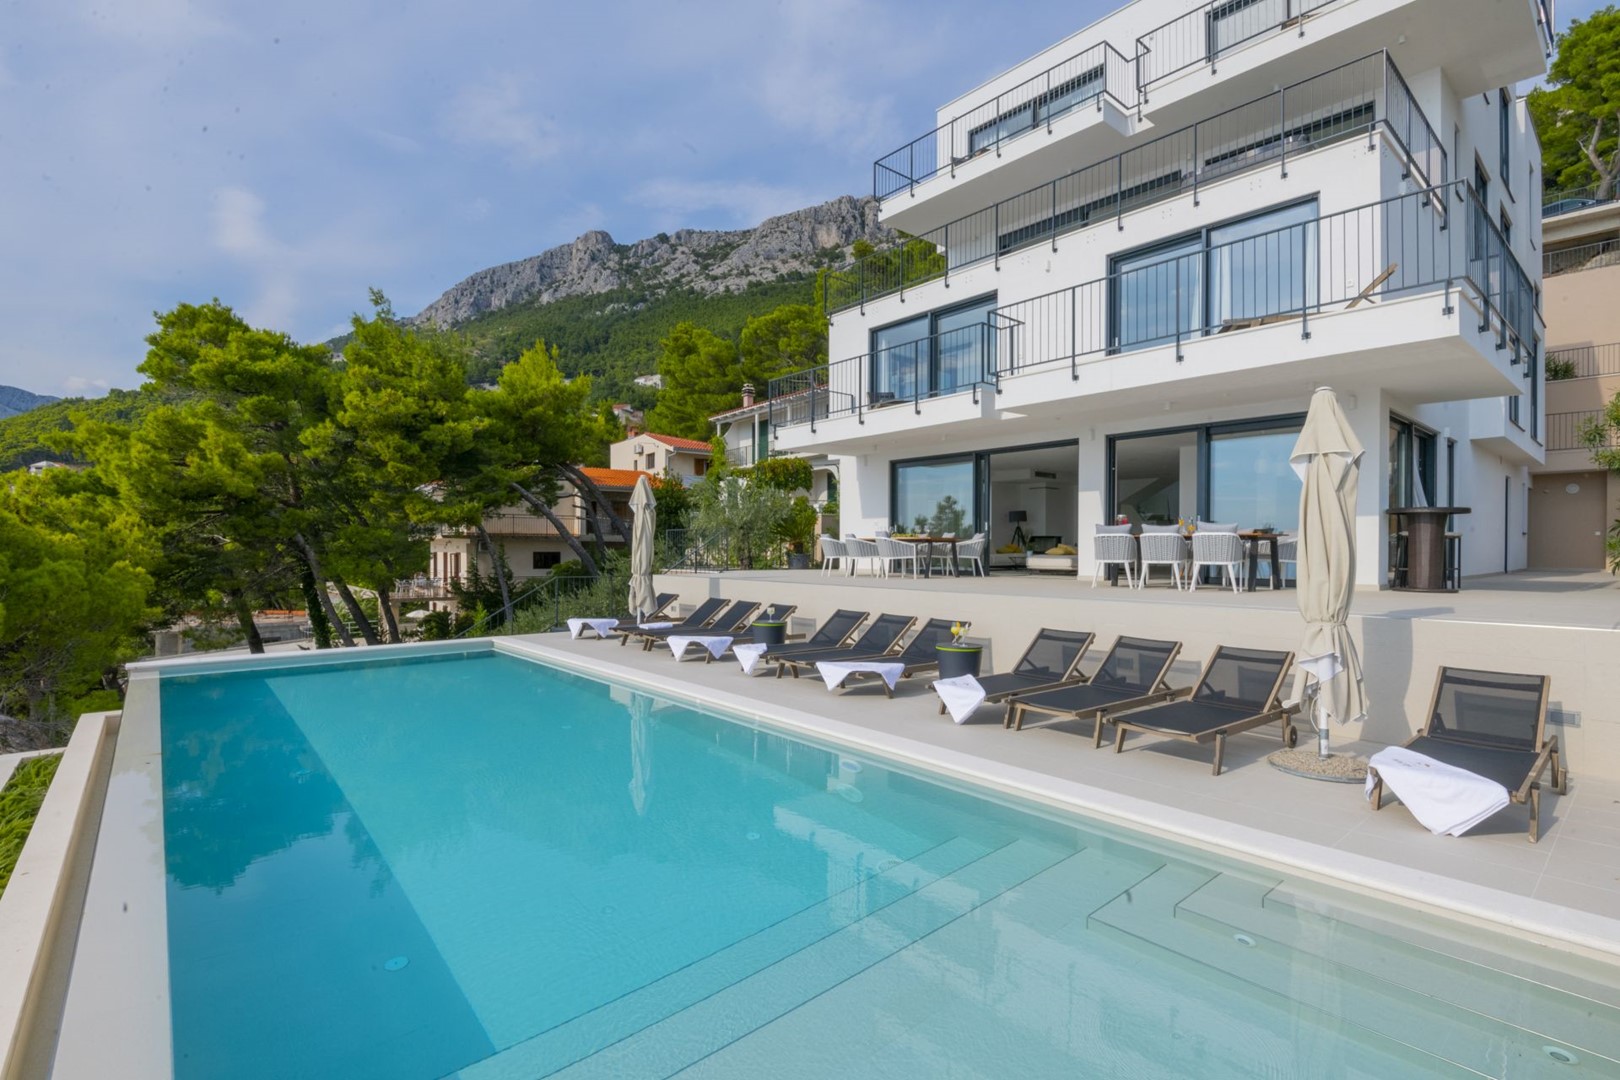 Exterior of Glorious Brela luxury villa with private heated pool and outdoor terrace with sun deck and deckchairs in Brela